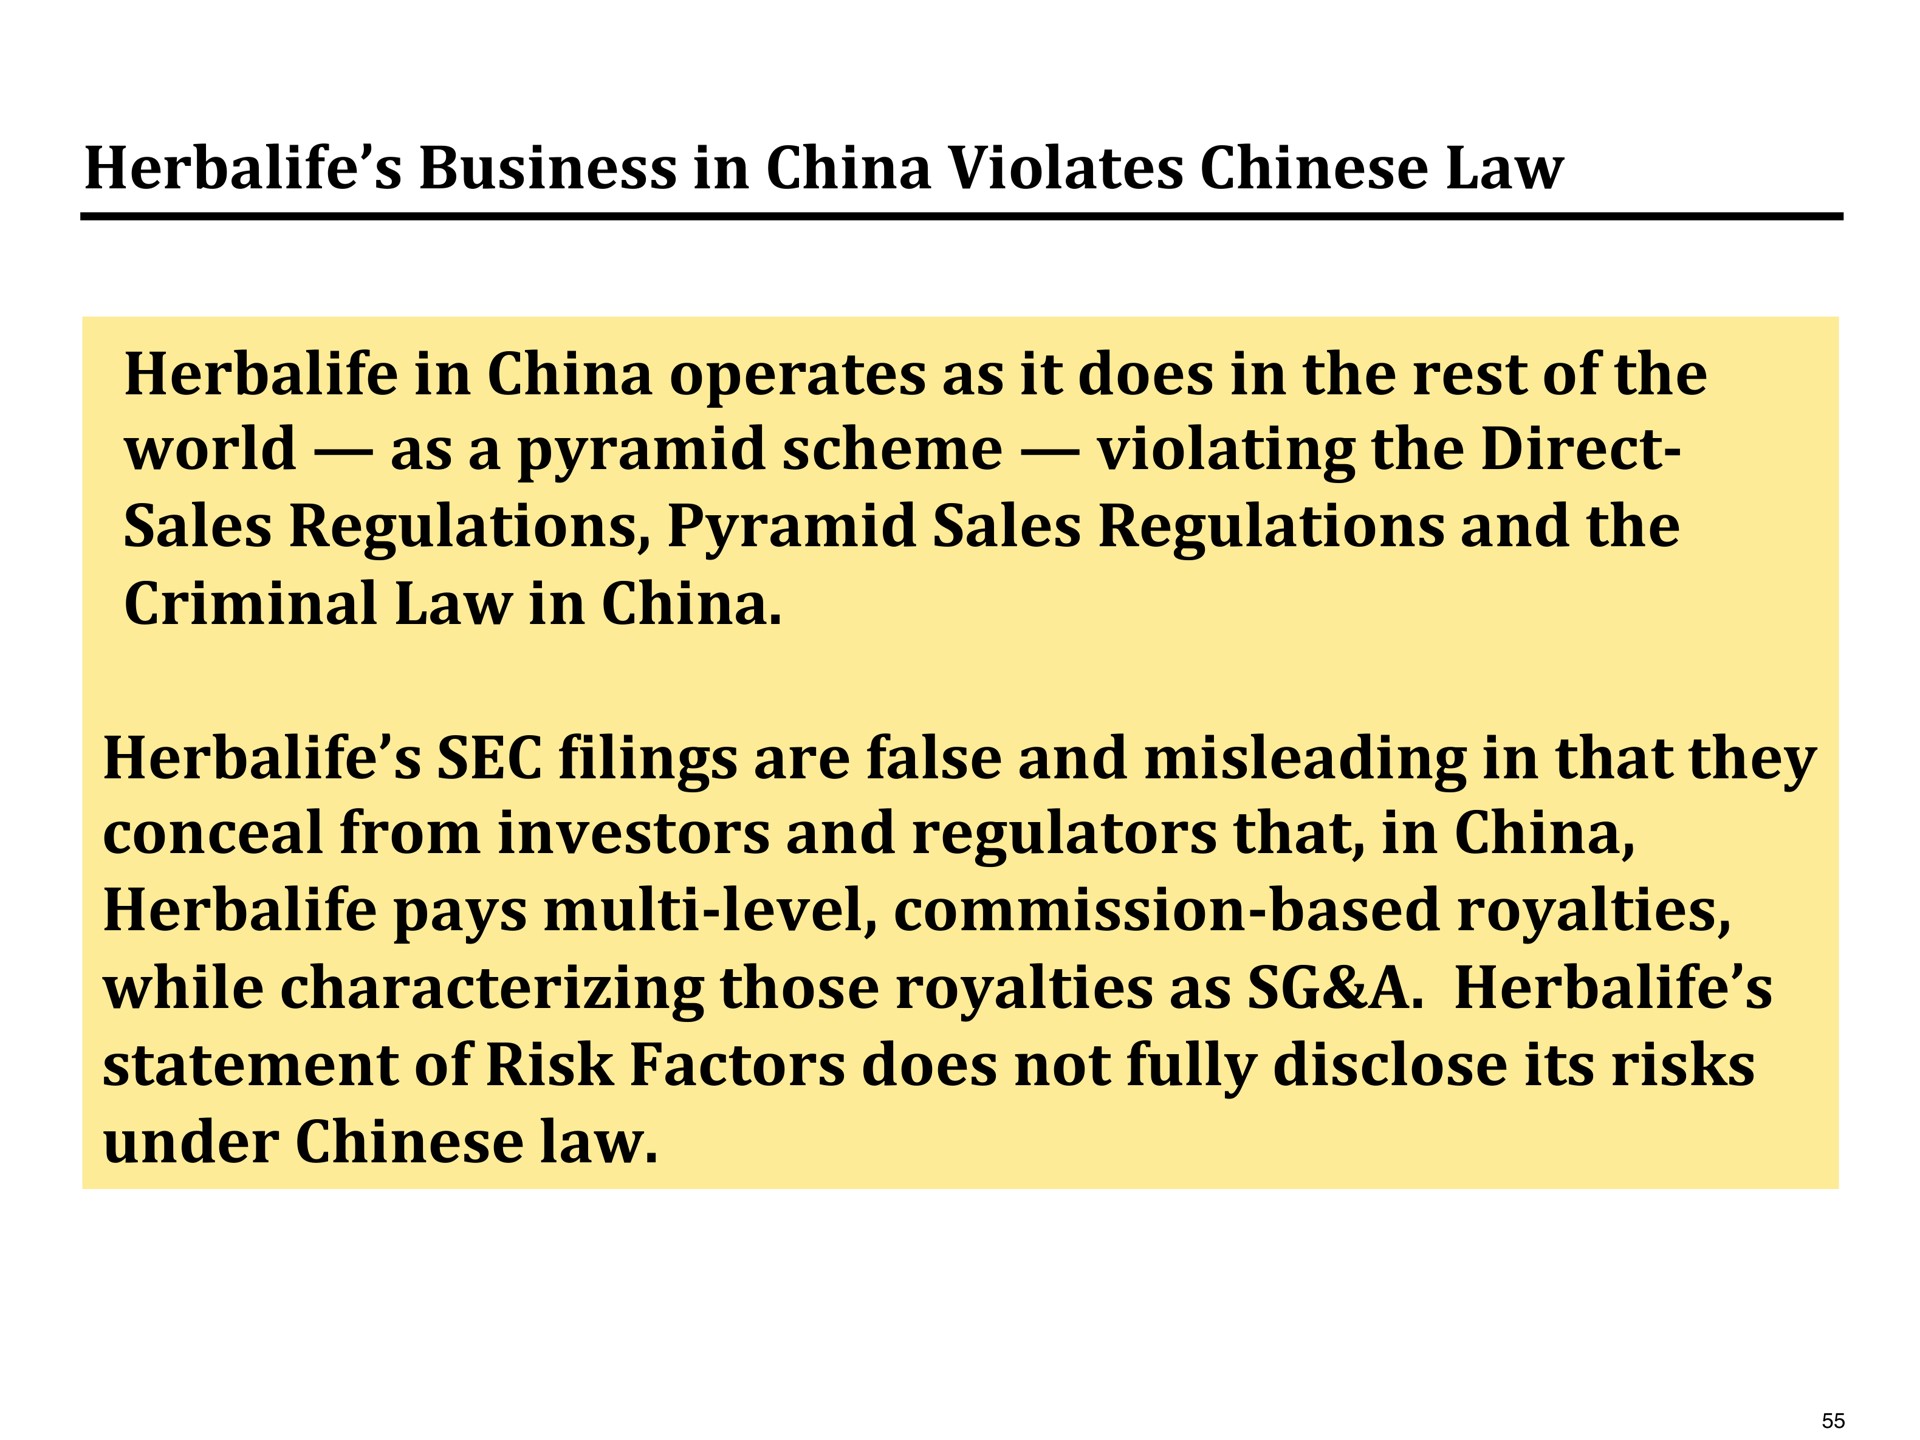 business in china violates law in china operates as it does in the rest of the world as a pyramid scheme violating the direct sales regulations pyramid sales regulations and the criminal law in china sec filings are false and misleading in that they conceal from investors and regulators that in china pays level commission based royalties while characterizing those royalties as a statement of risk factors does not fully disclose its risks under law level commission based | Pershing Square